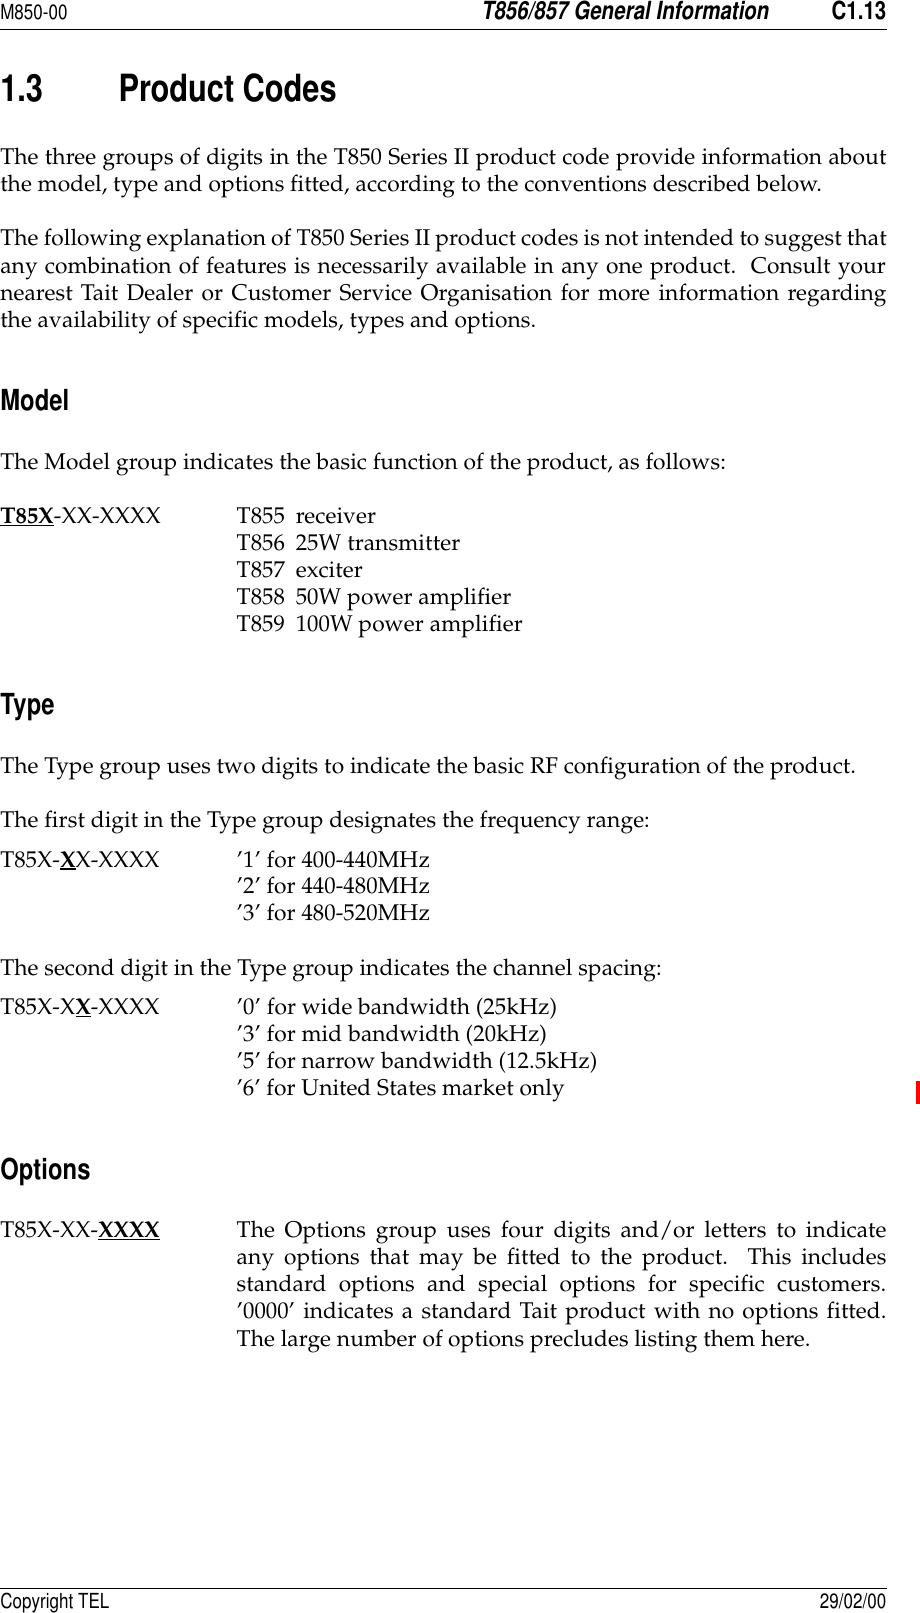 M850-00T856/857 General InformationC1.13Copyright TEL 29/02/001.3 Product CodesThe three groups of digits in the T850 Series II product code provide information aboutthe model, type and options fitted, according to the conventions described below.The following explanation of T850 Series II product codes is not intended to suggest thatany combination of features is necessarily available in any one product.  Consult yournearest Tait Dealer or Customer Service Organisation for more information regardingthe availability of specific models, types and options.ModelThe Model group indicates the basic function of the product, as follows:T85X-XX-XXXX T855 receiverT856 25W transmitterT857 exciterT858 50W power amplifierT859 100W power amplifierTypeThe Type group uses two digits to indicate the basic RF configuration of the product.The first digit in the Type group designates the frequency range:T85X-XX-XXXX ’1’ for 400-440MHz’2’ for 440-480MHz’3’ for 480-520MHzThe second digit in the Type group indicates the channel spacing:T85X-XX-XXXX ’0’ for wide bandwidth (25kHz)’3’ for mid bandwidth (20kHz)’5’ for narrow bandwidth (12.5kHz)’6’ for United States market onlyOptionsT85X-XX-XXXX The Options group uses four digits and/or letters to indicateany options that may be fitted to the product.  This includesstandard options and special options for specific customers.’0000’ indicates a standard Tait product with no options fitted.The large number of options precludes listing them here.